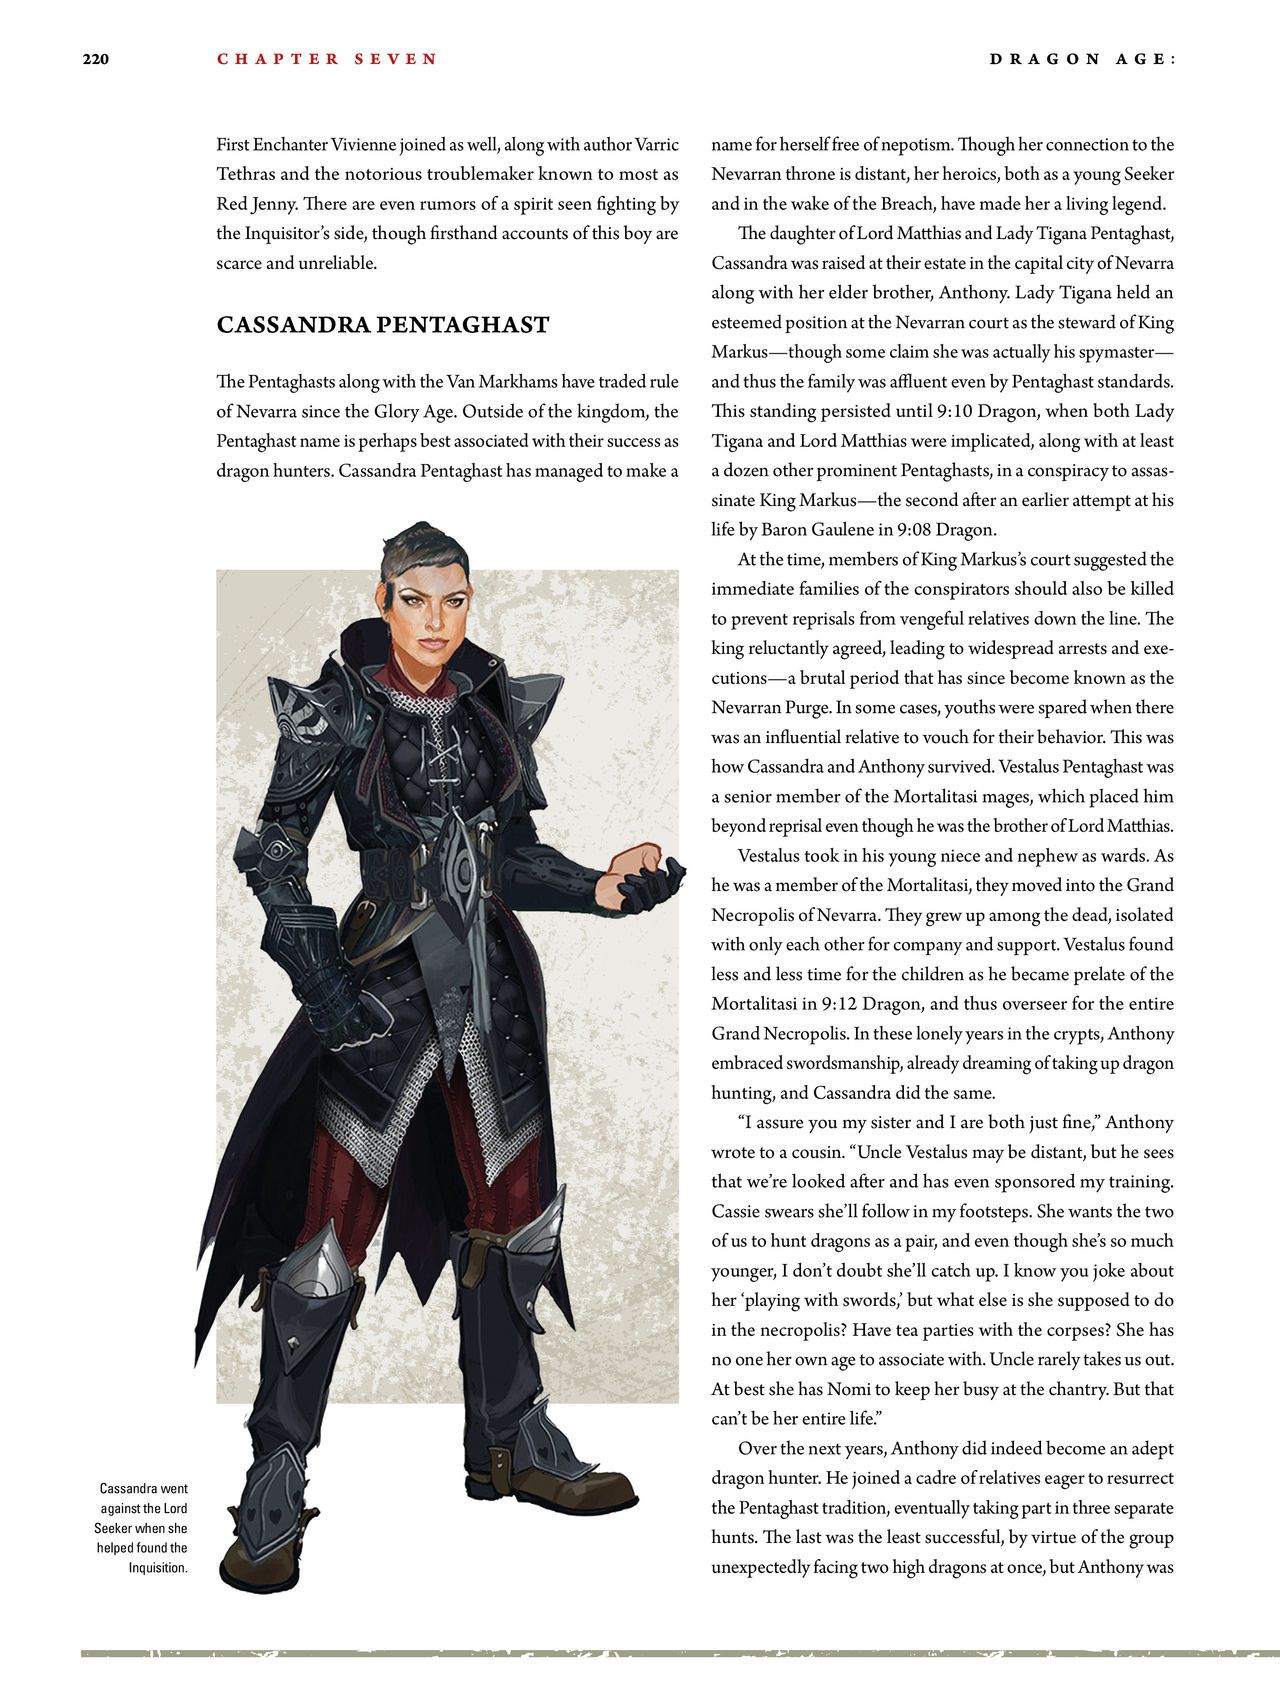 Dragon Age - The World of Thedas v02 215